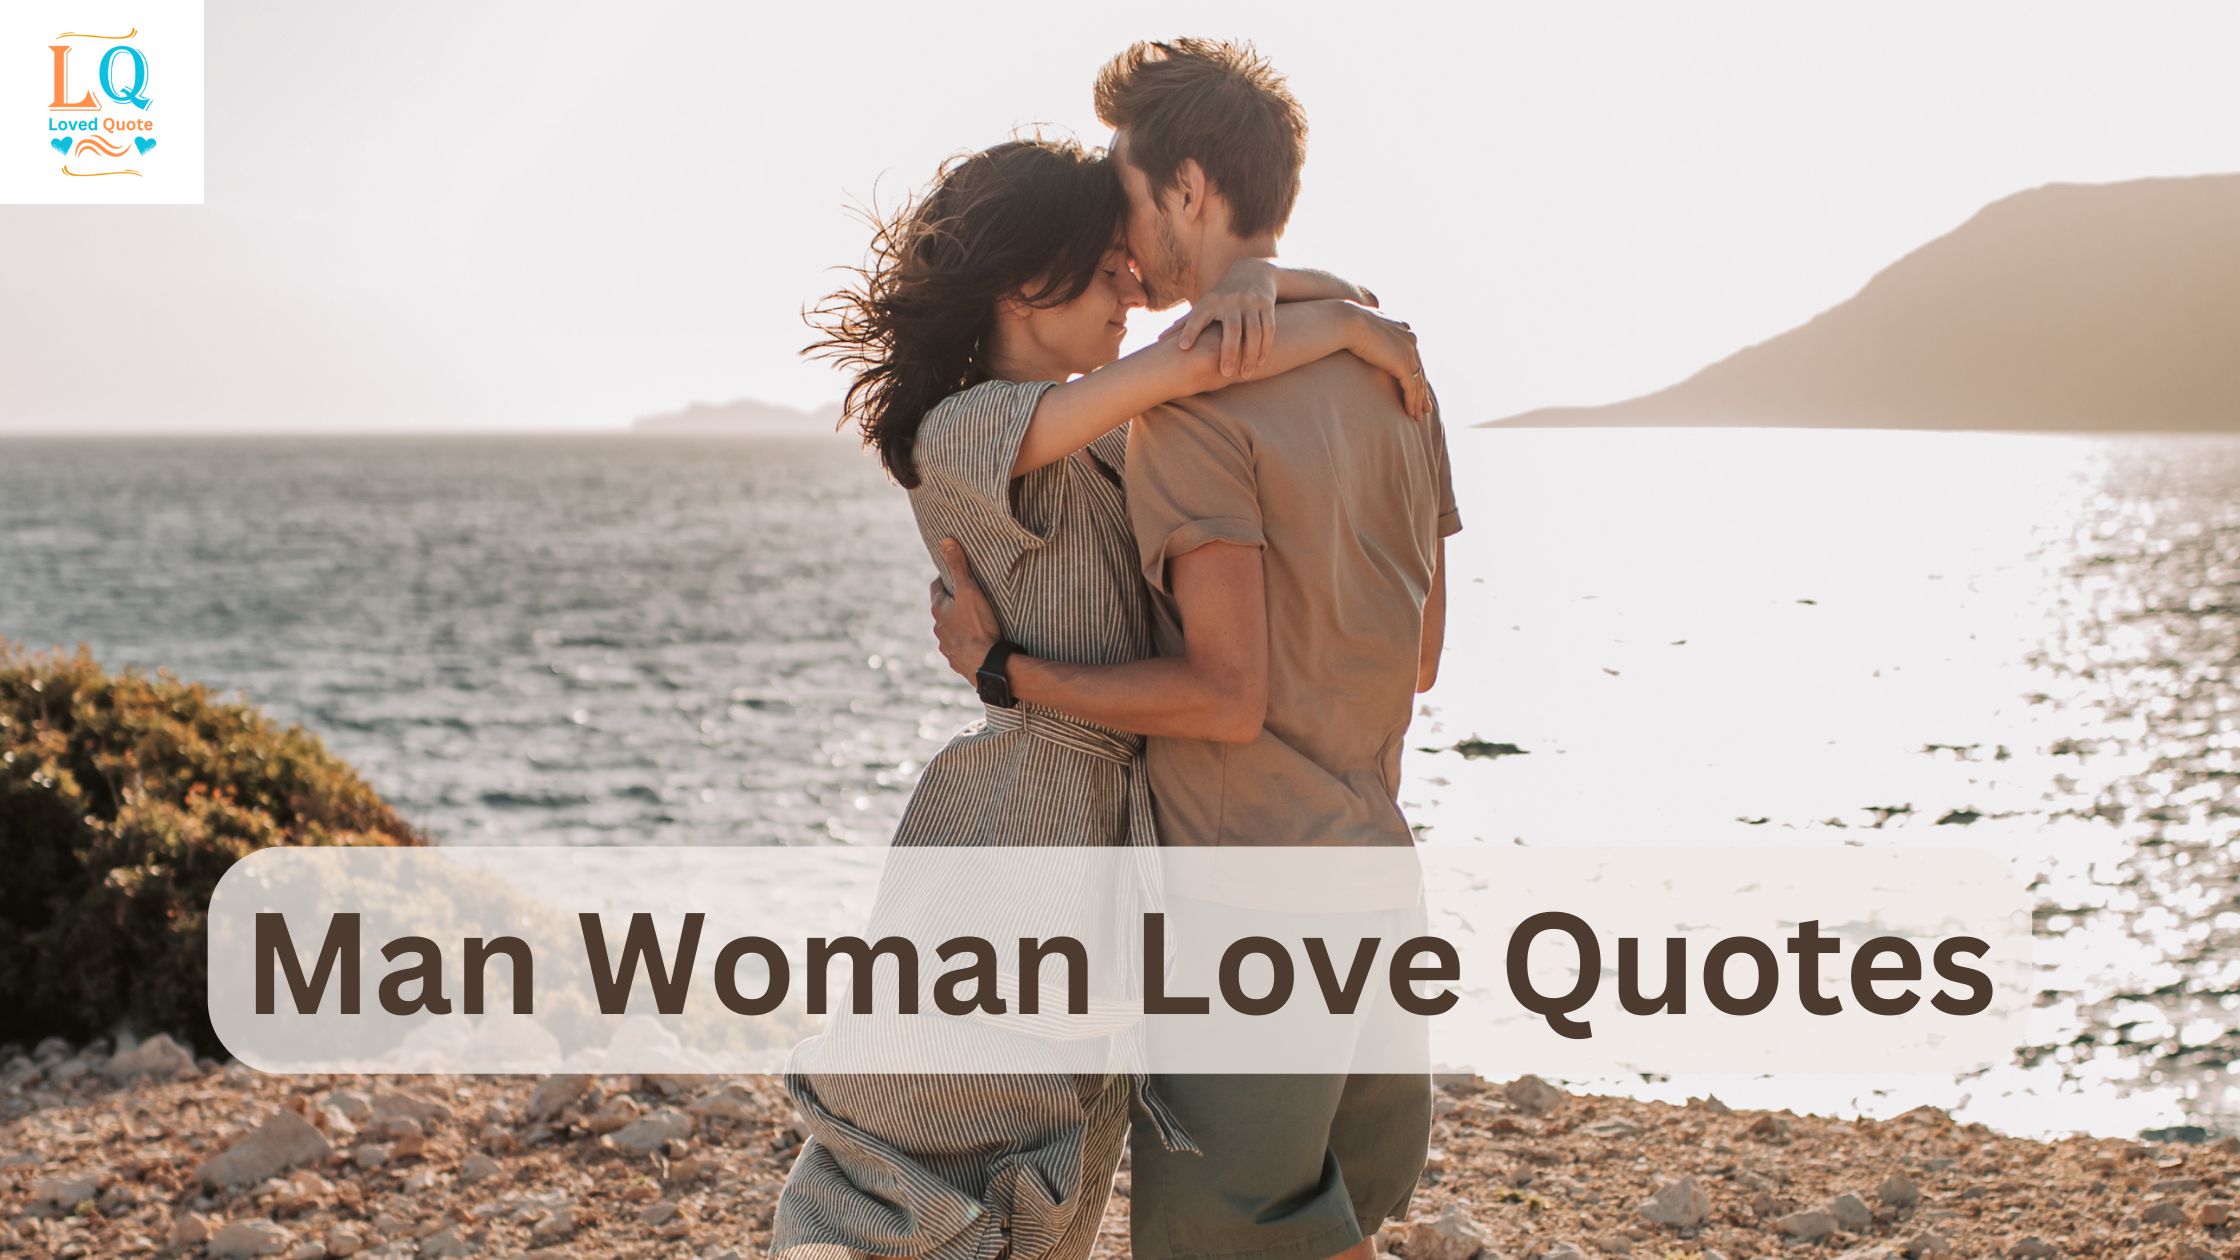 Man Woman Love Quotes